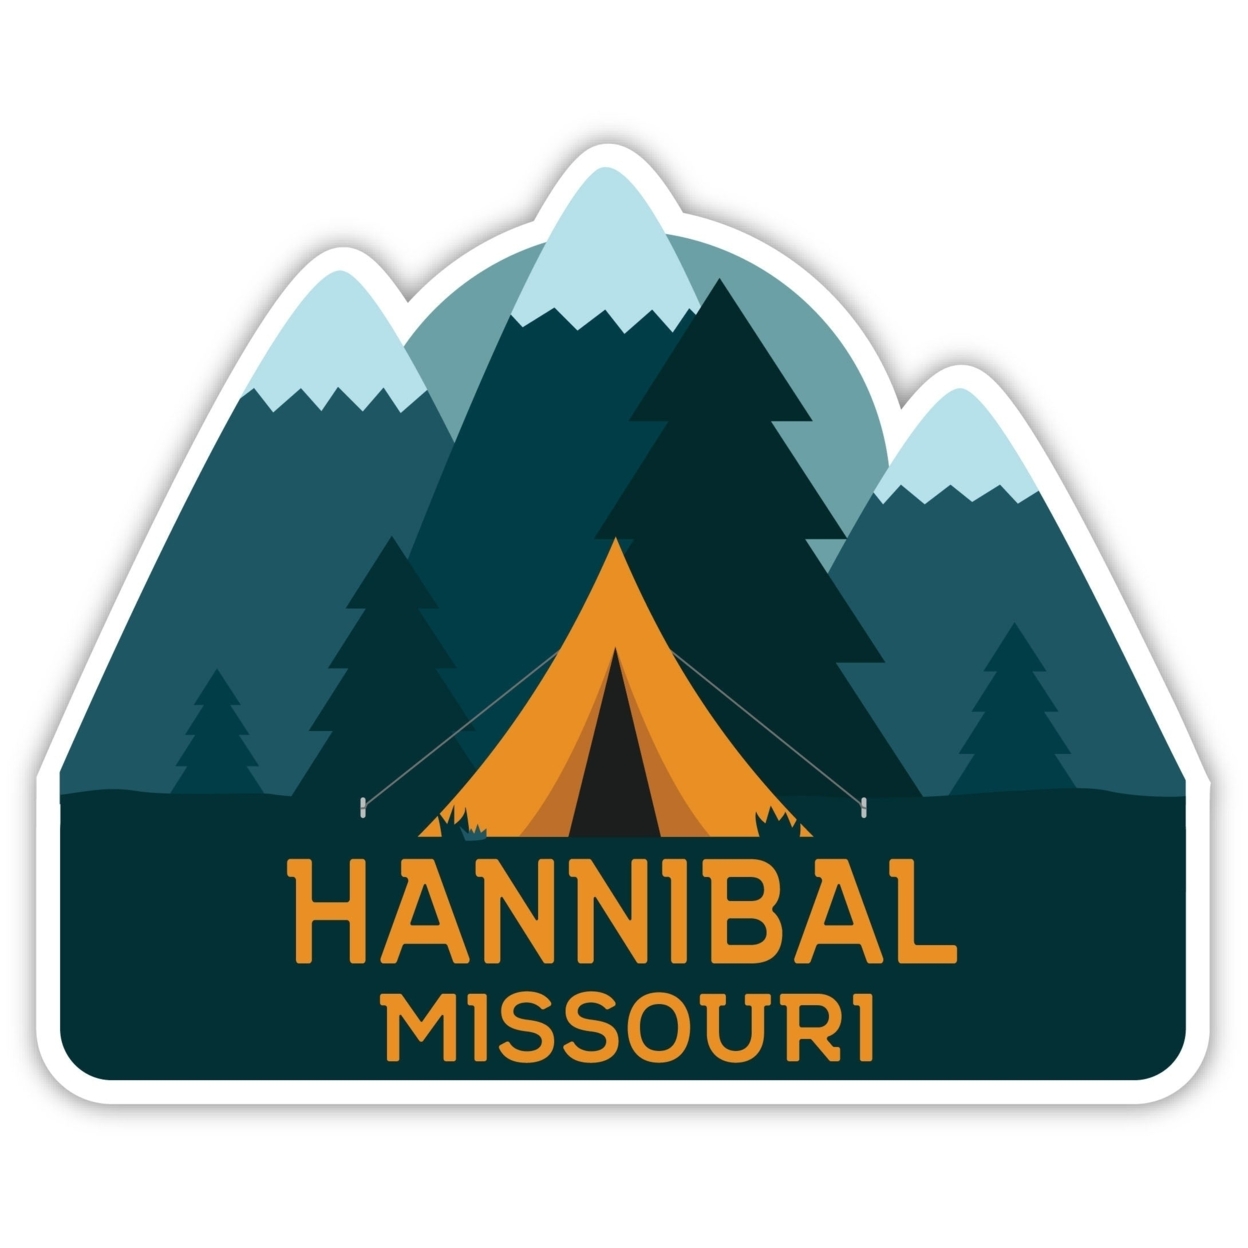 Hannibal Missouri Souvenir Decorative Stickers (Choose Theme And Size) - 4-Pack, 4-Inch, Camp Life